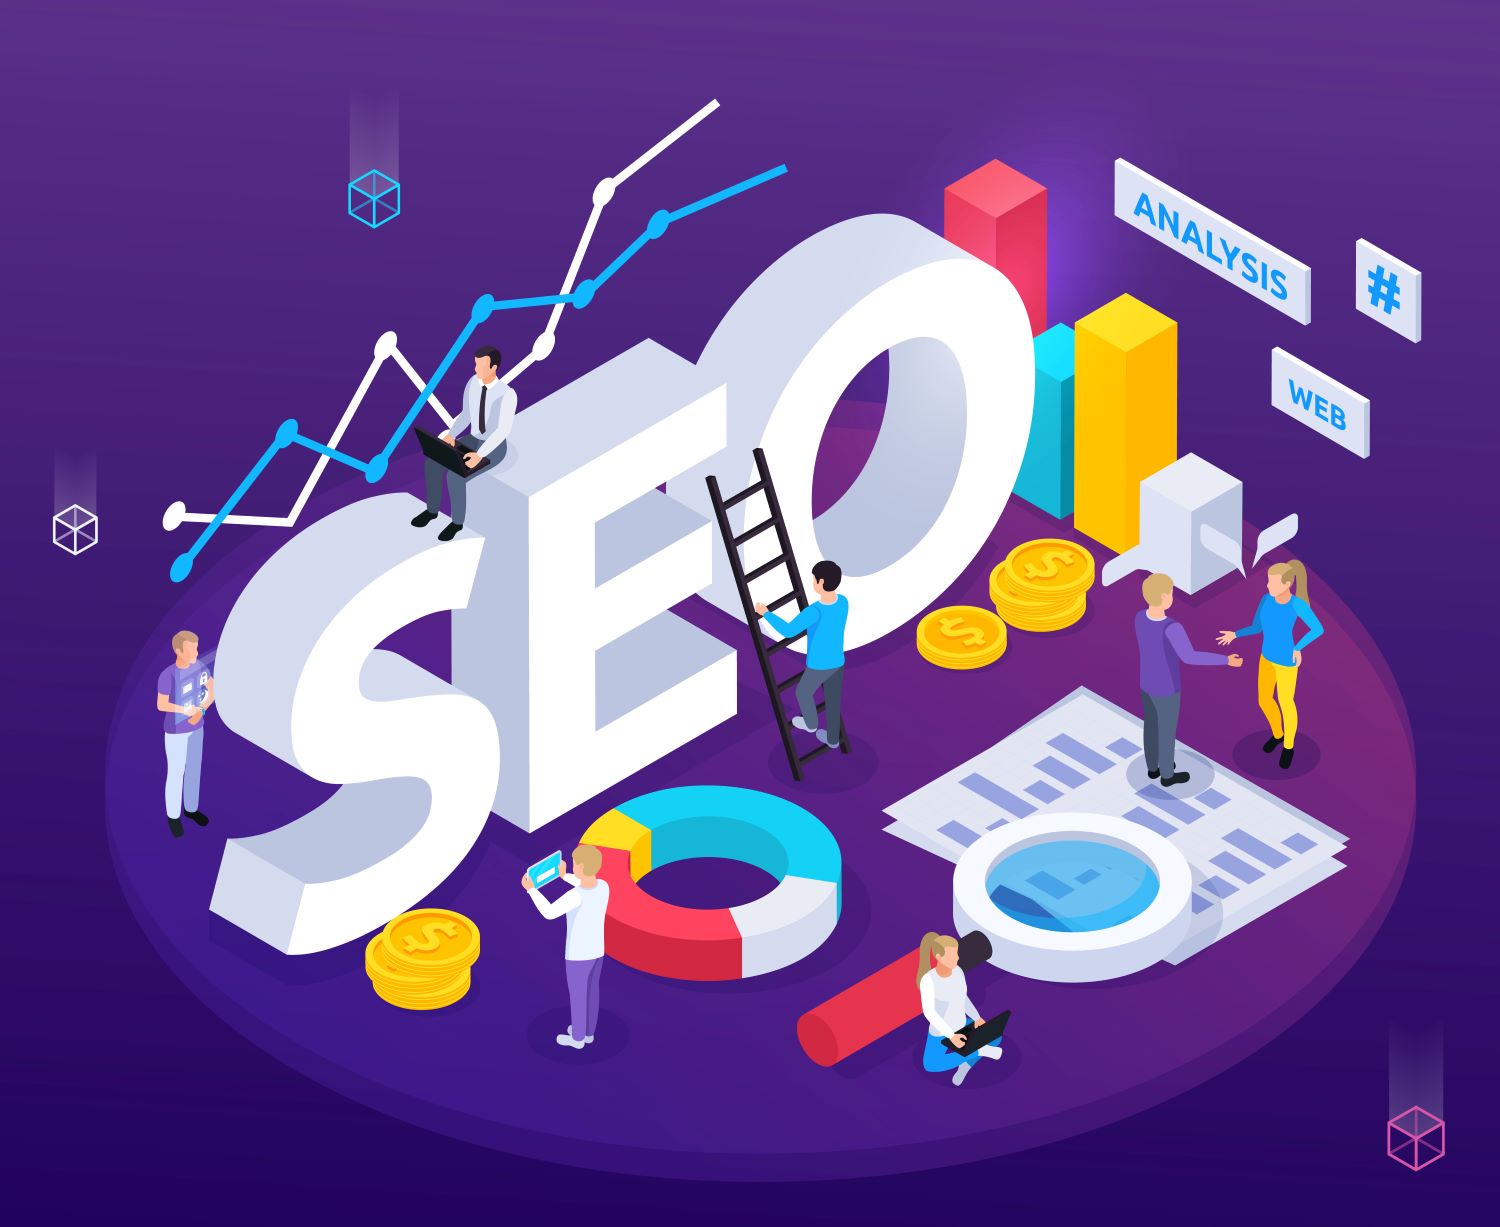 Image SEO best practices and optimization tips